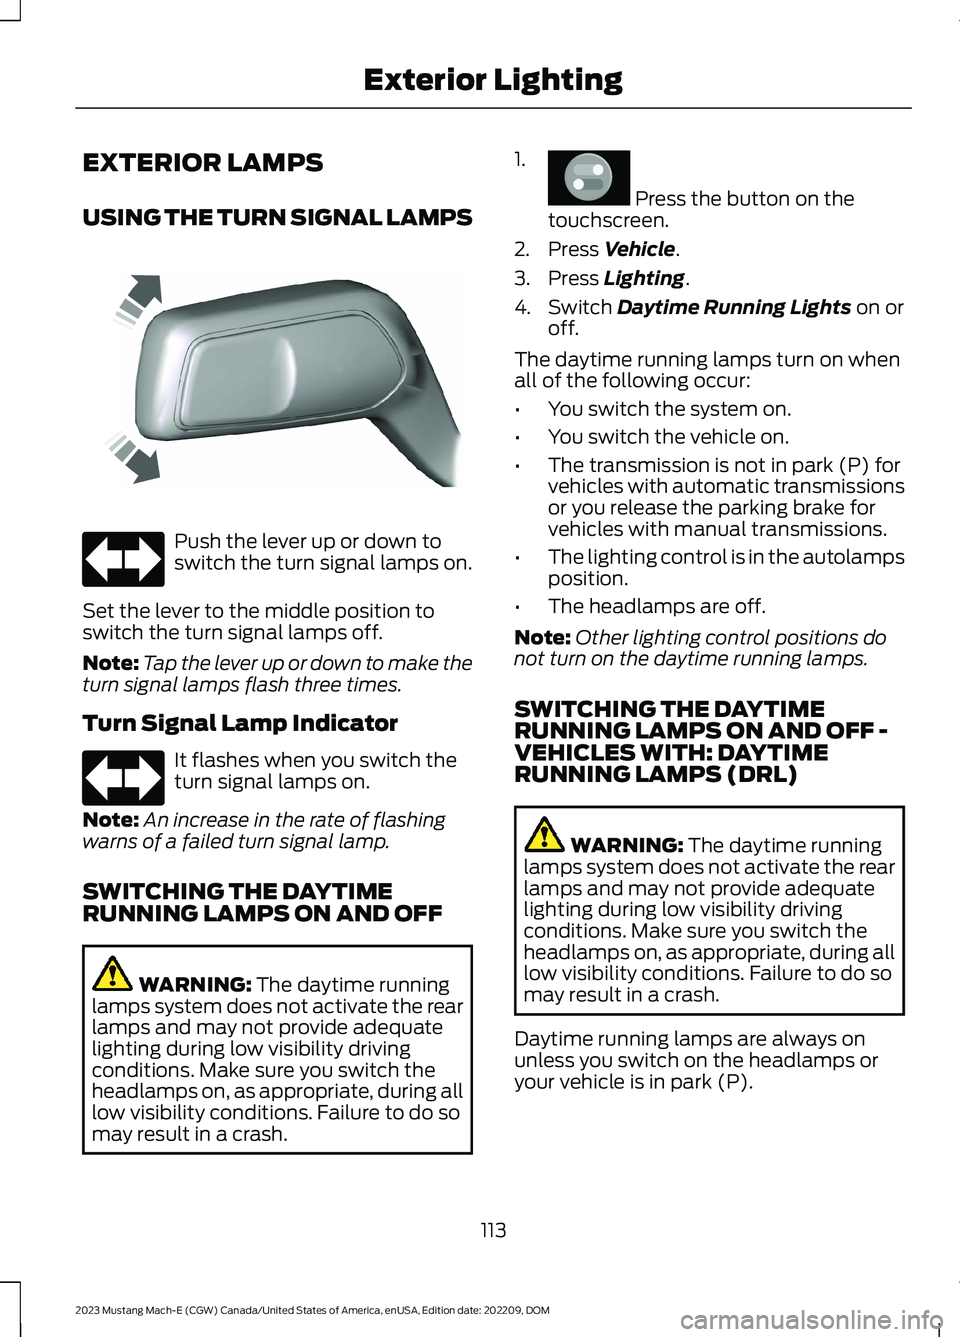 FORD MUSTANG MACH E 2023  Owners Manual EXTERIOR LAMPS
USING THE TURN SIGNAL LAMPS
Push the lever up or down toswitch the turn signal lamps on.
Set the lever to the middle position toswitch the turn signal lamps off.
Note:Tap the lever up o